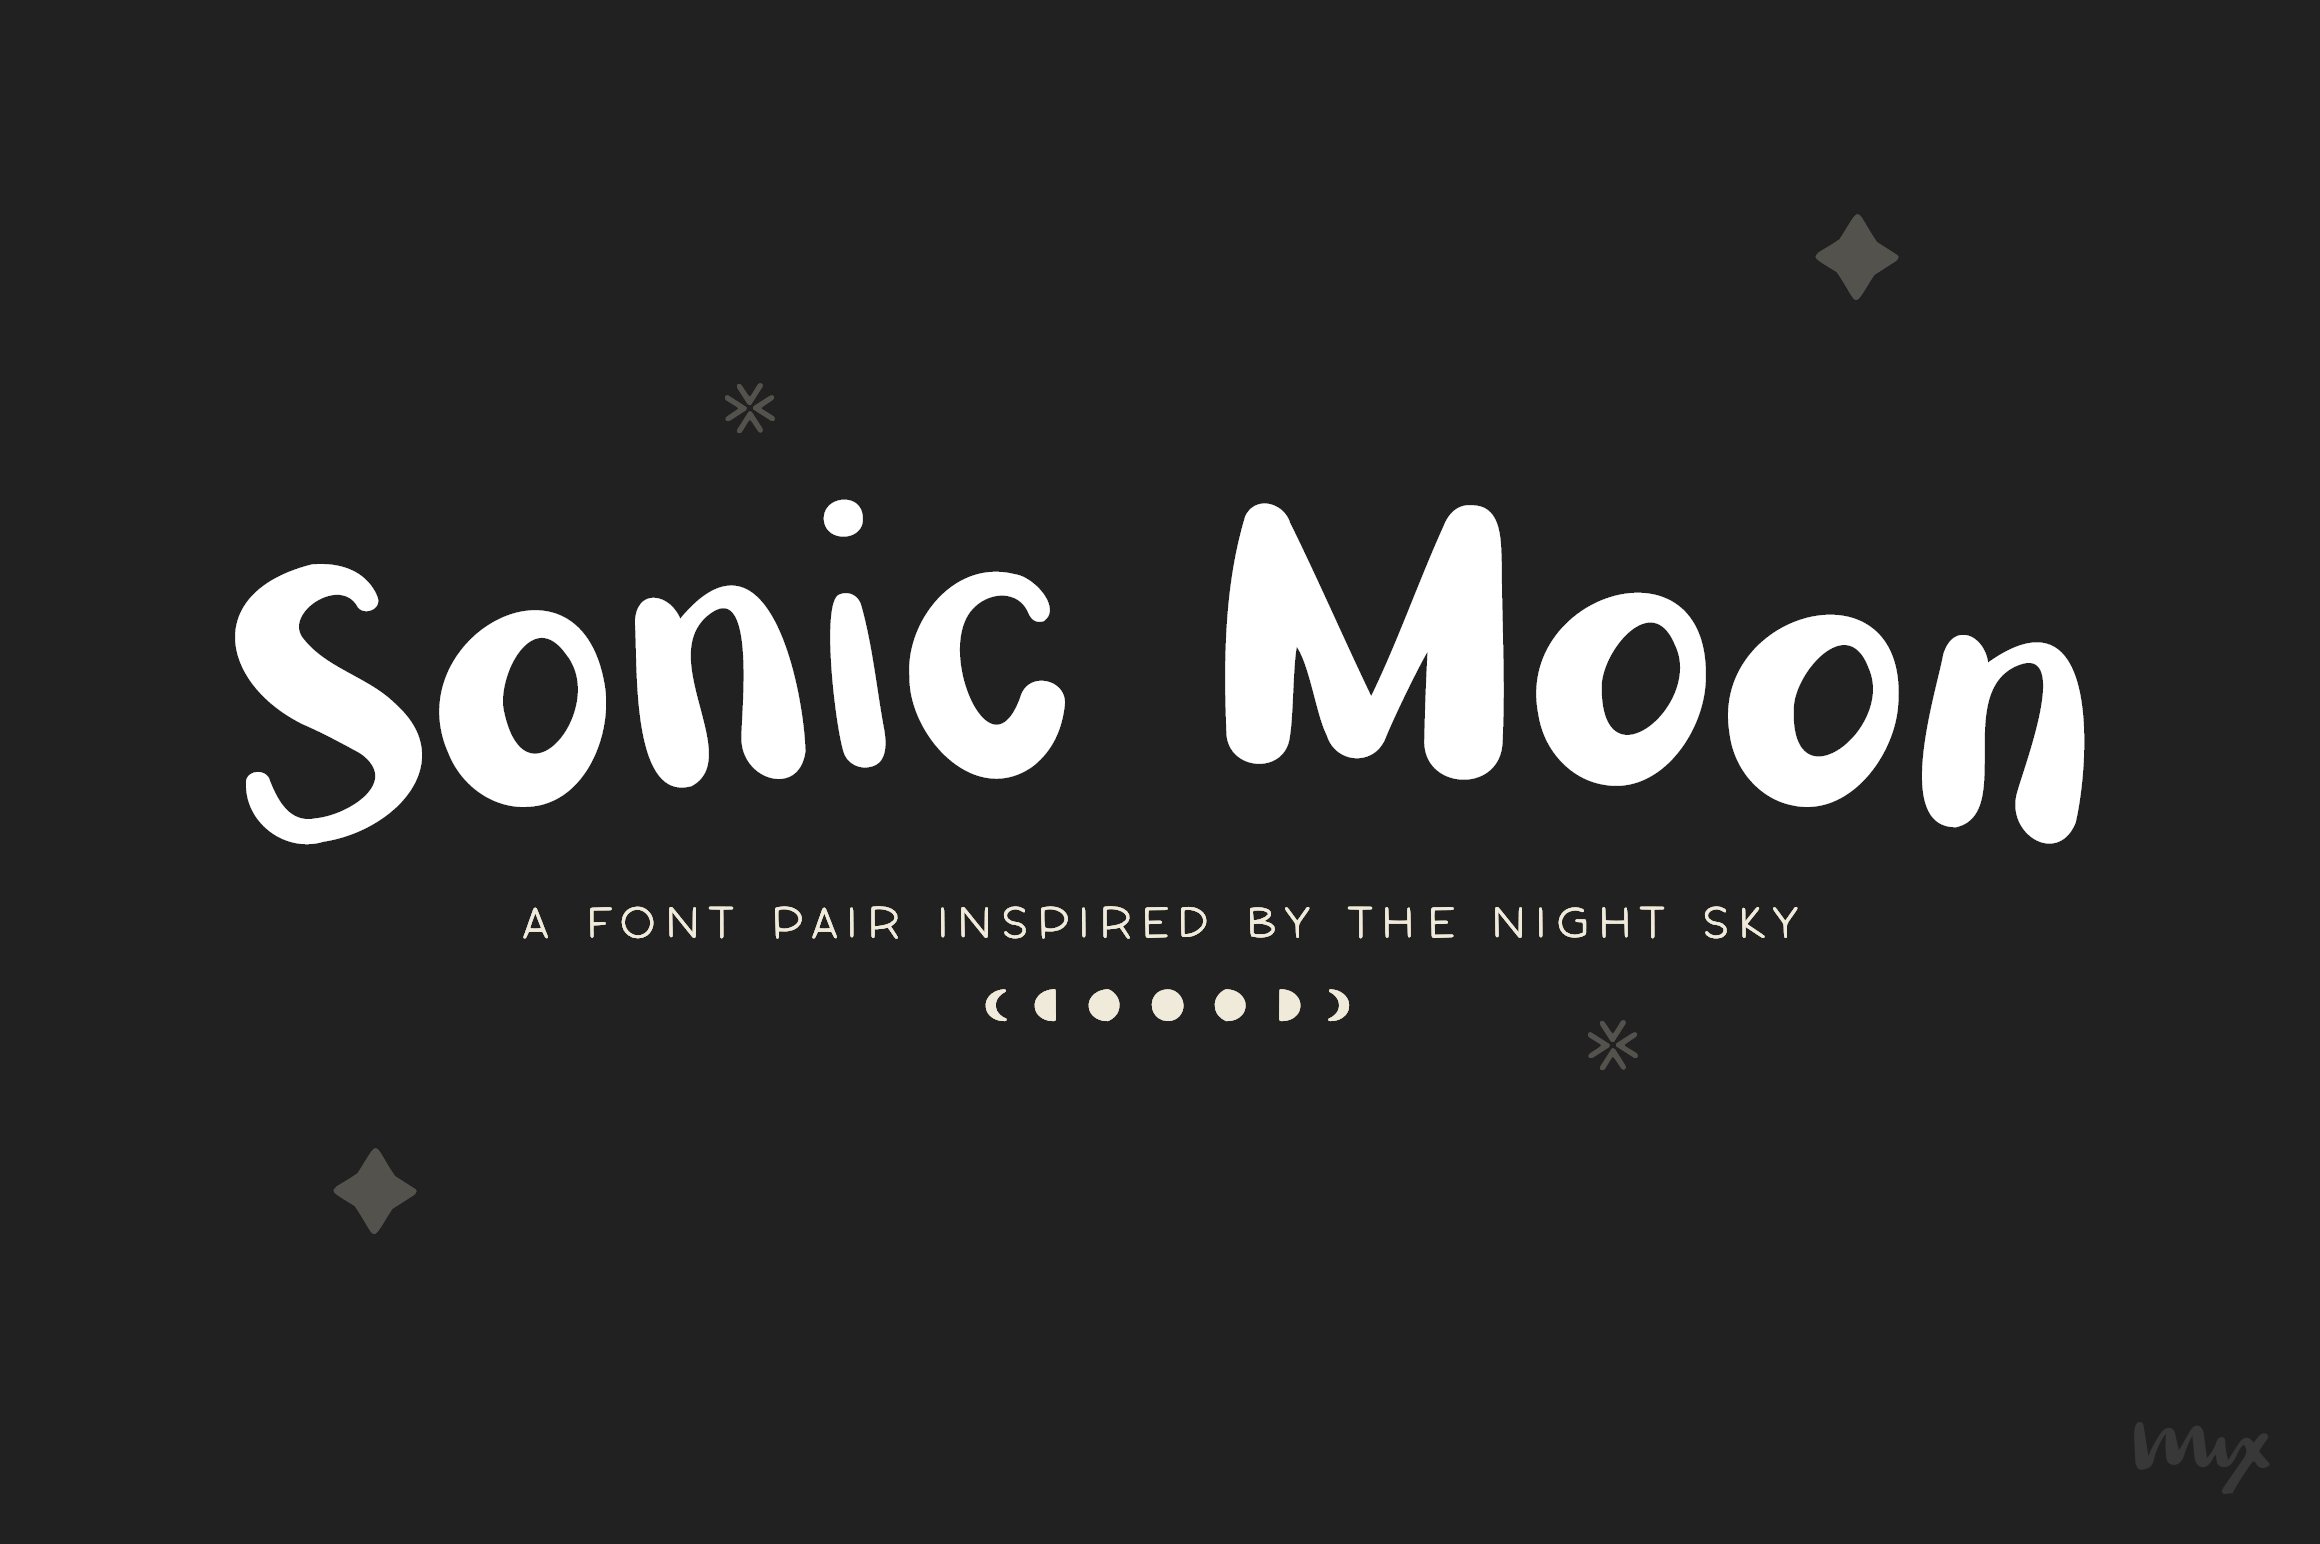 Sonic Moon — A Font Duo cover image.